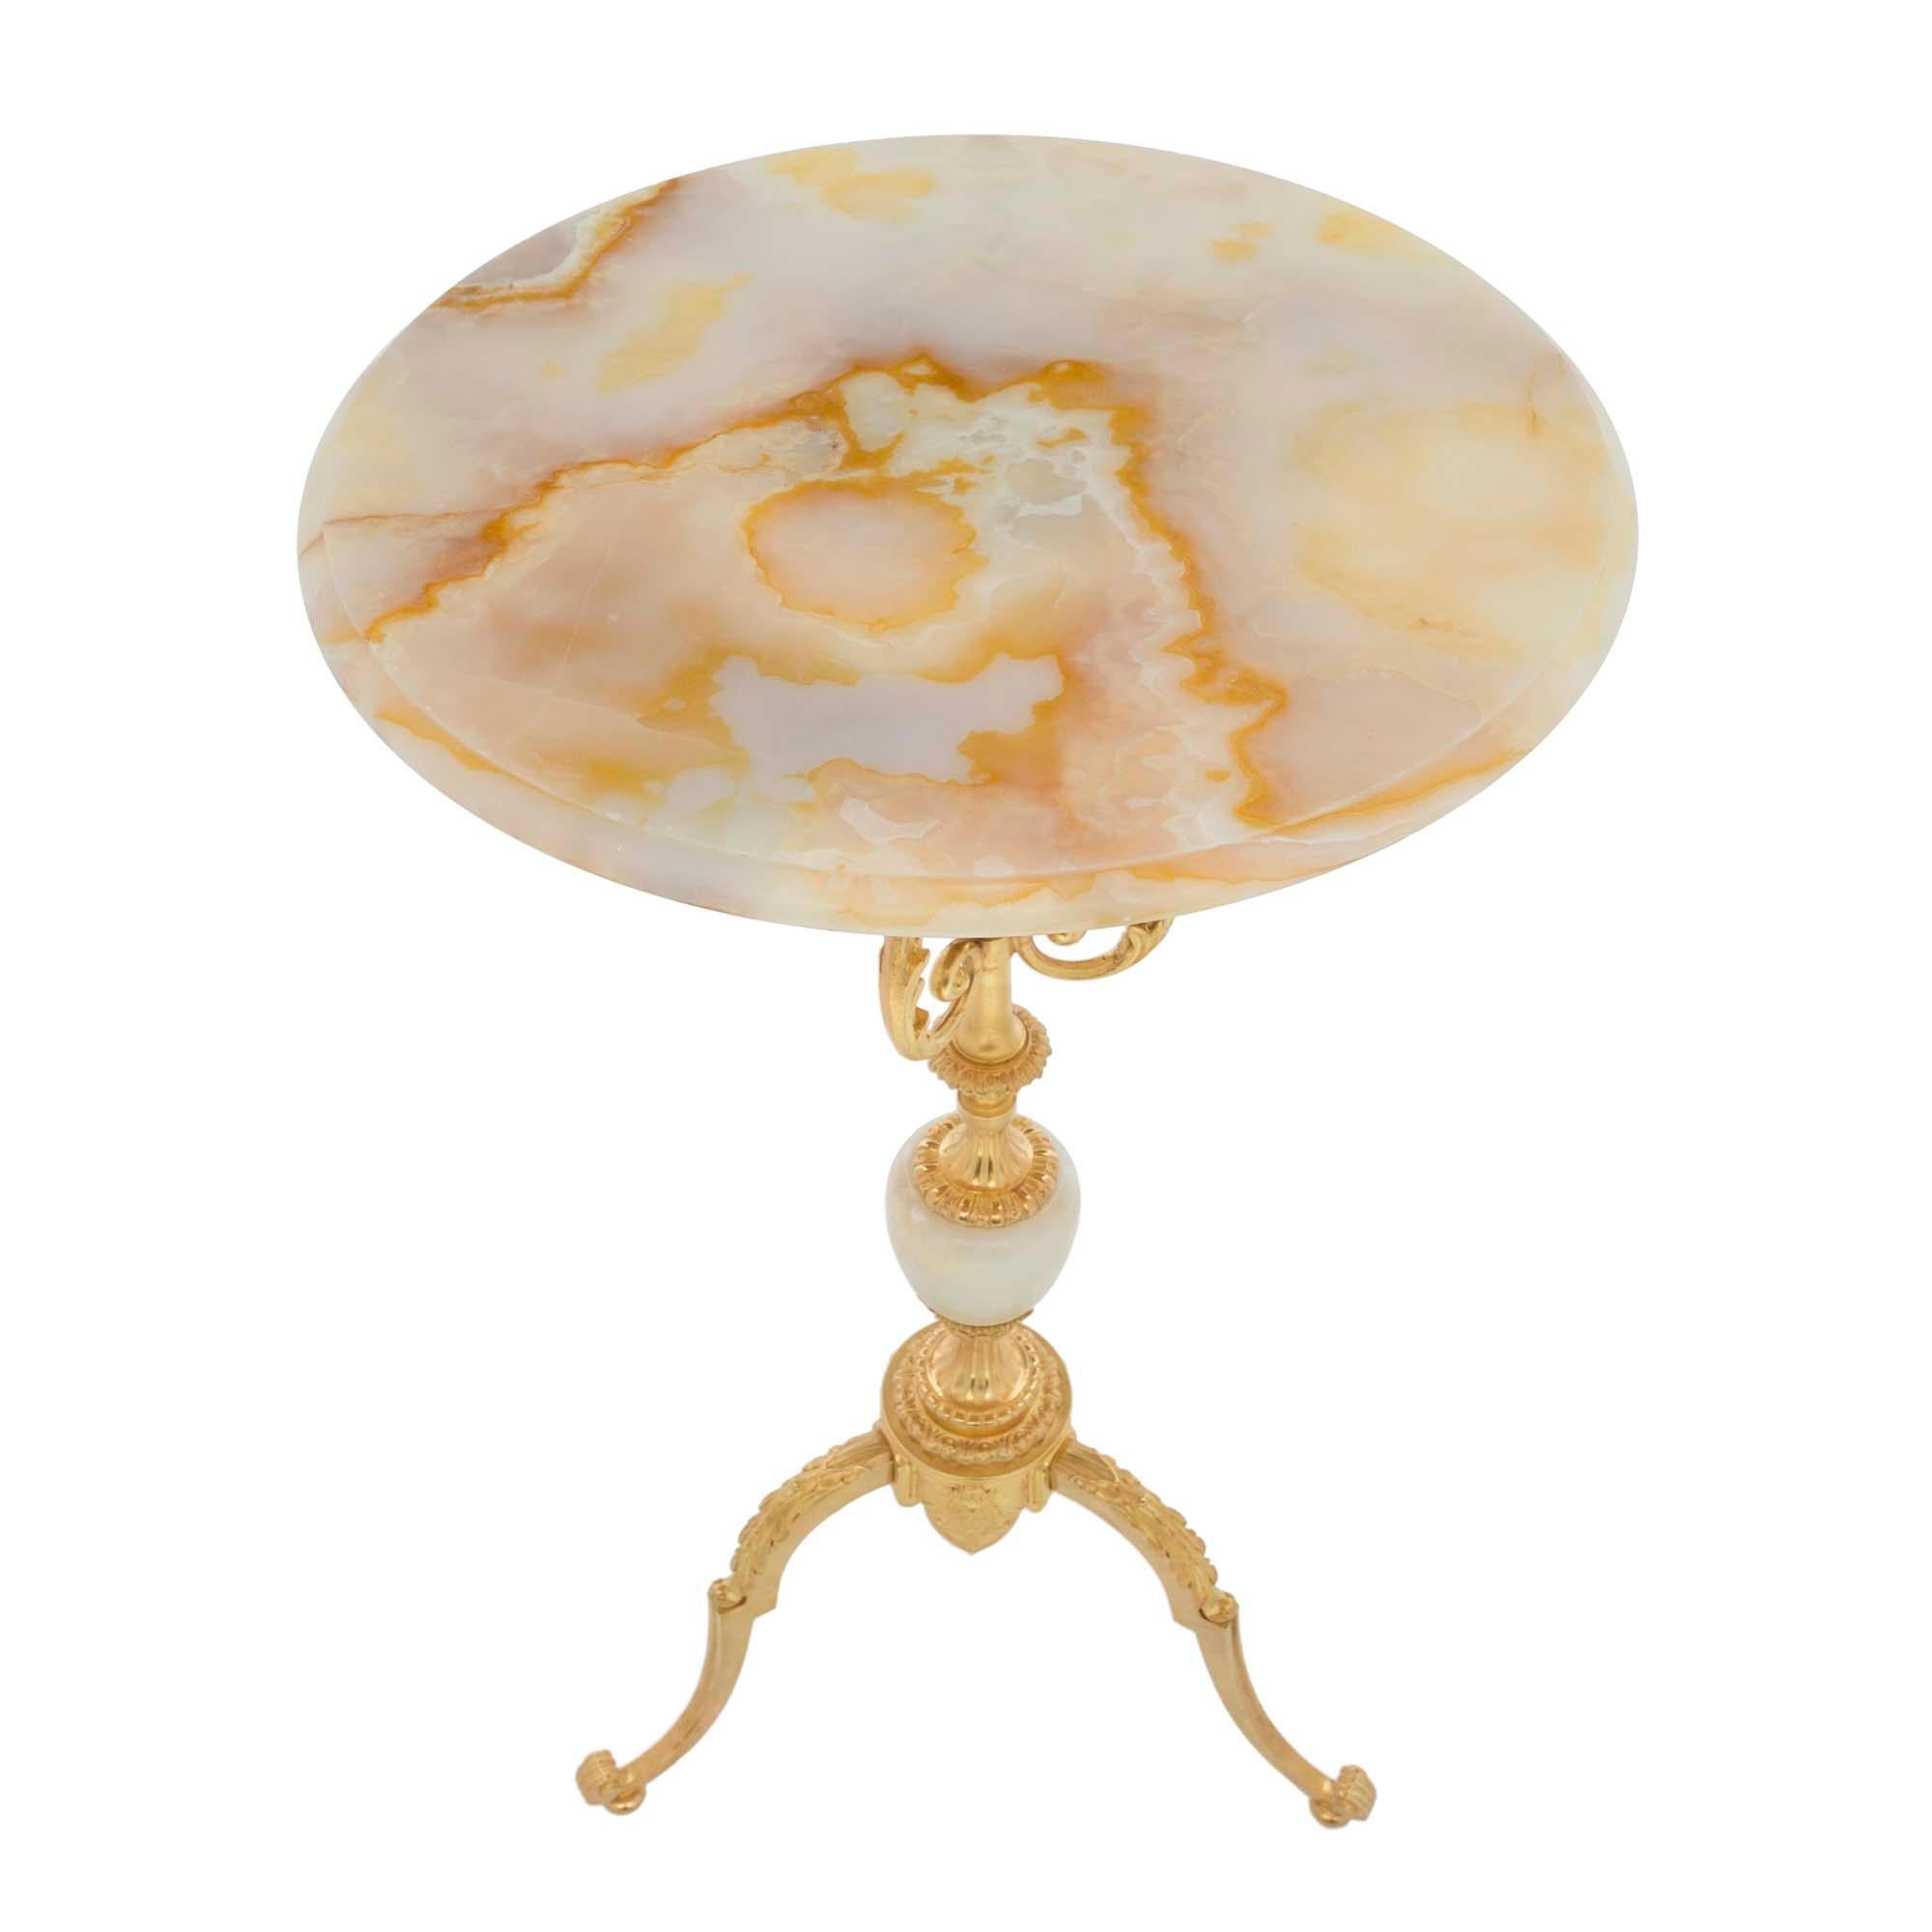 French 19th Century Louis XVI St. Napoleon III Period Onyx and Ormolu Side Table In Good Condition For Sale In West Palm Beach, FL